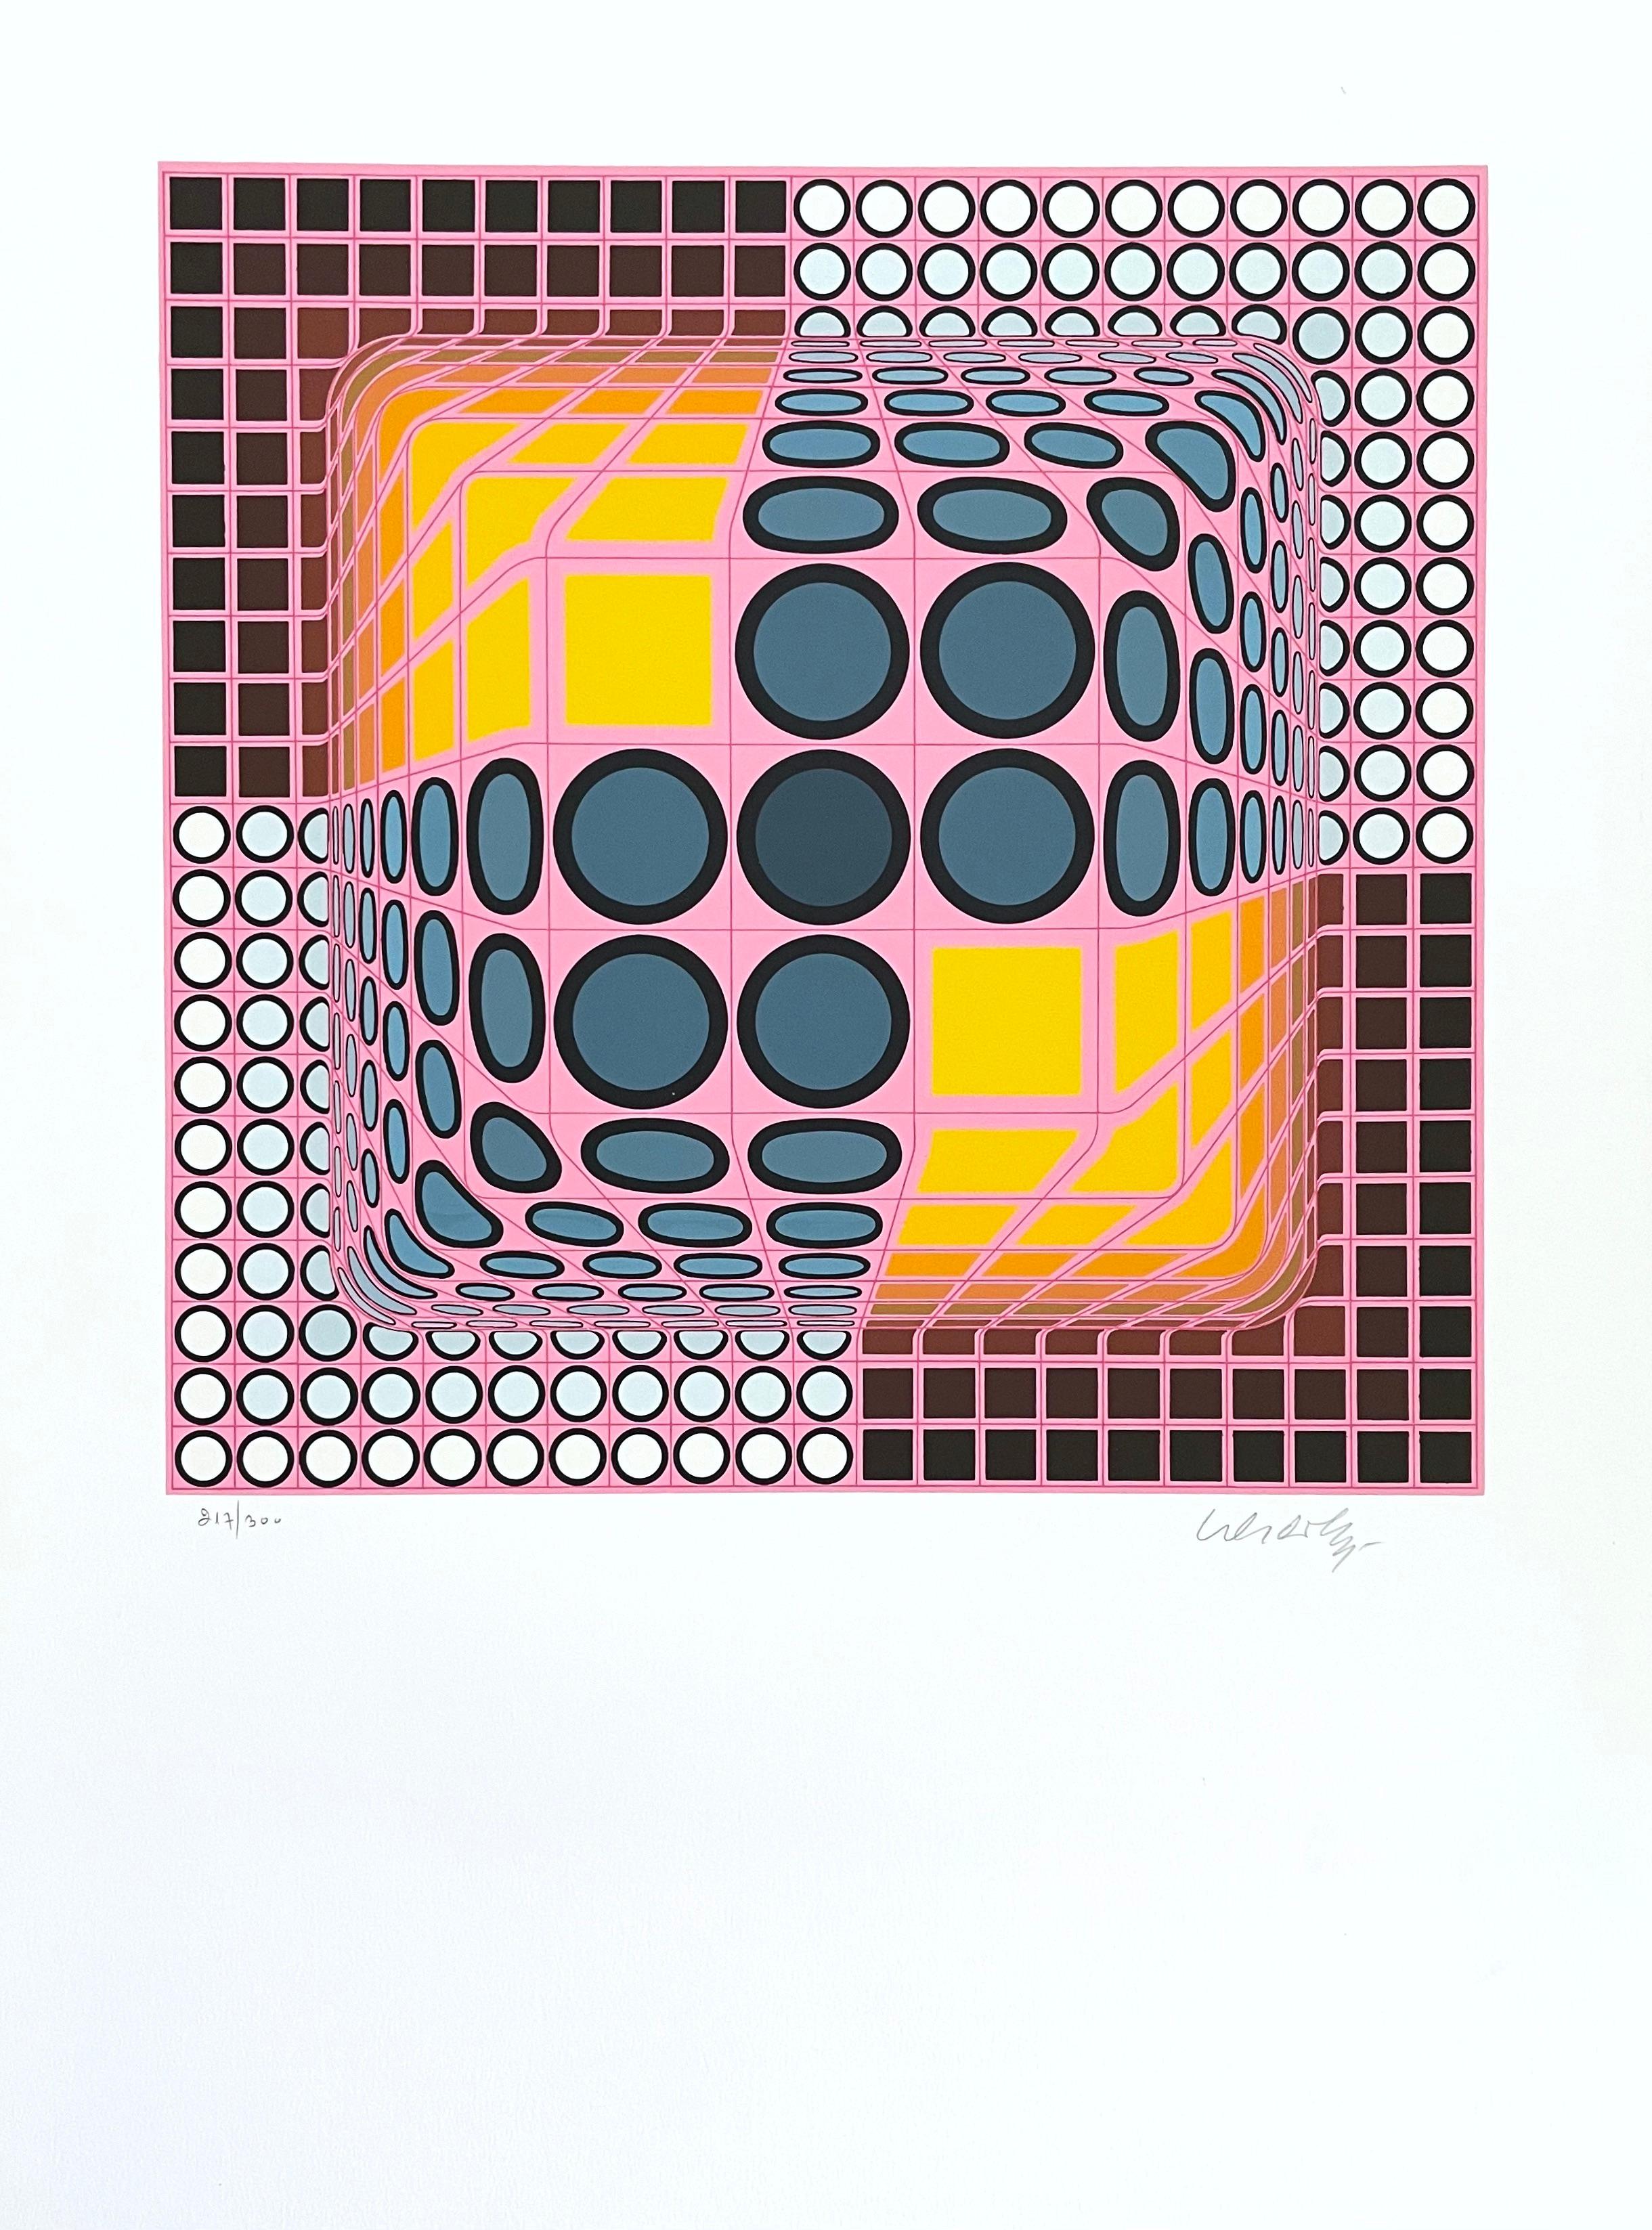 Artist: Victor Vasarely (1908-1997)
Title: Pink Composition
Year: Circa 1982
Medium: Silkscreen on Arches paper
Edition: 217/300, plus proofs
Size: 27.5 x 20.25 inches
Condition: Good
Inscription: Signed and numbered by the artist.
Notes:  Published